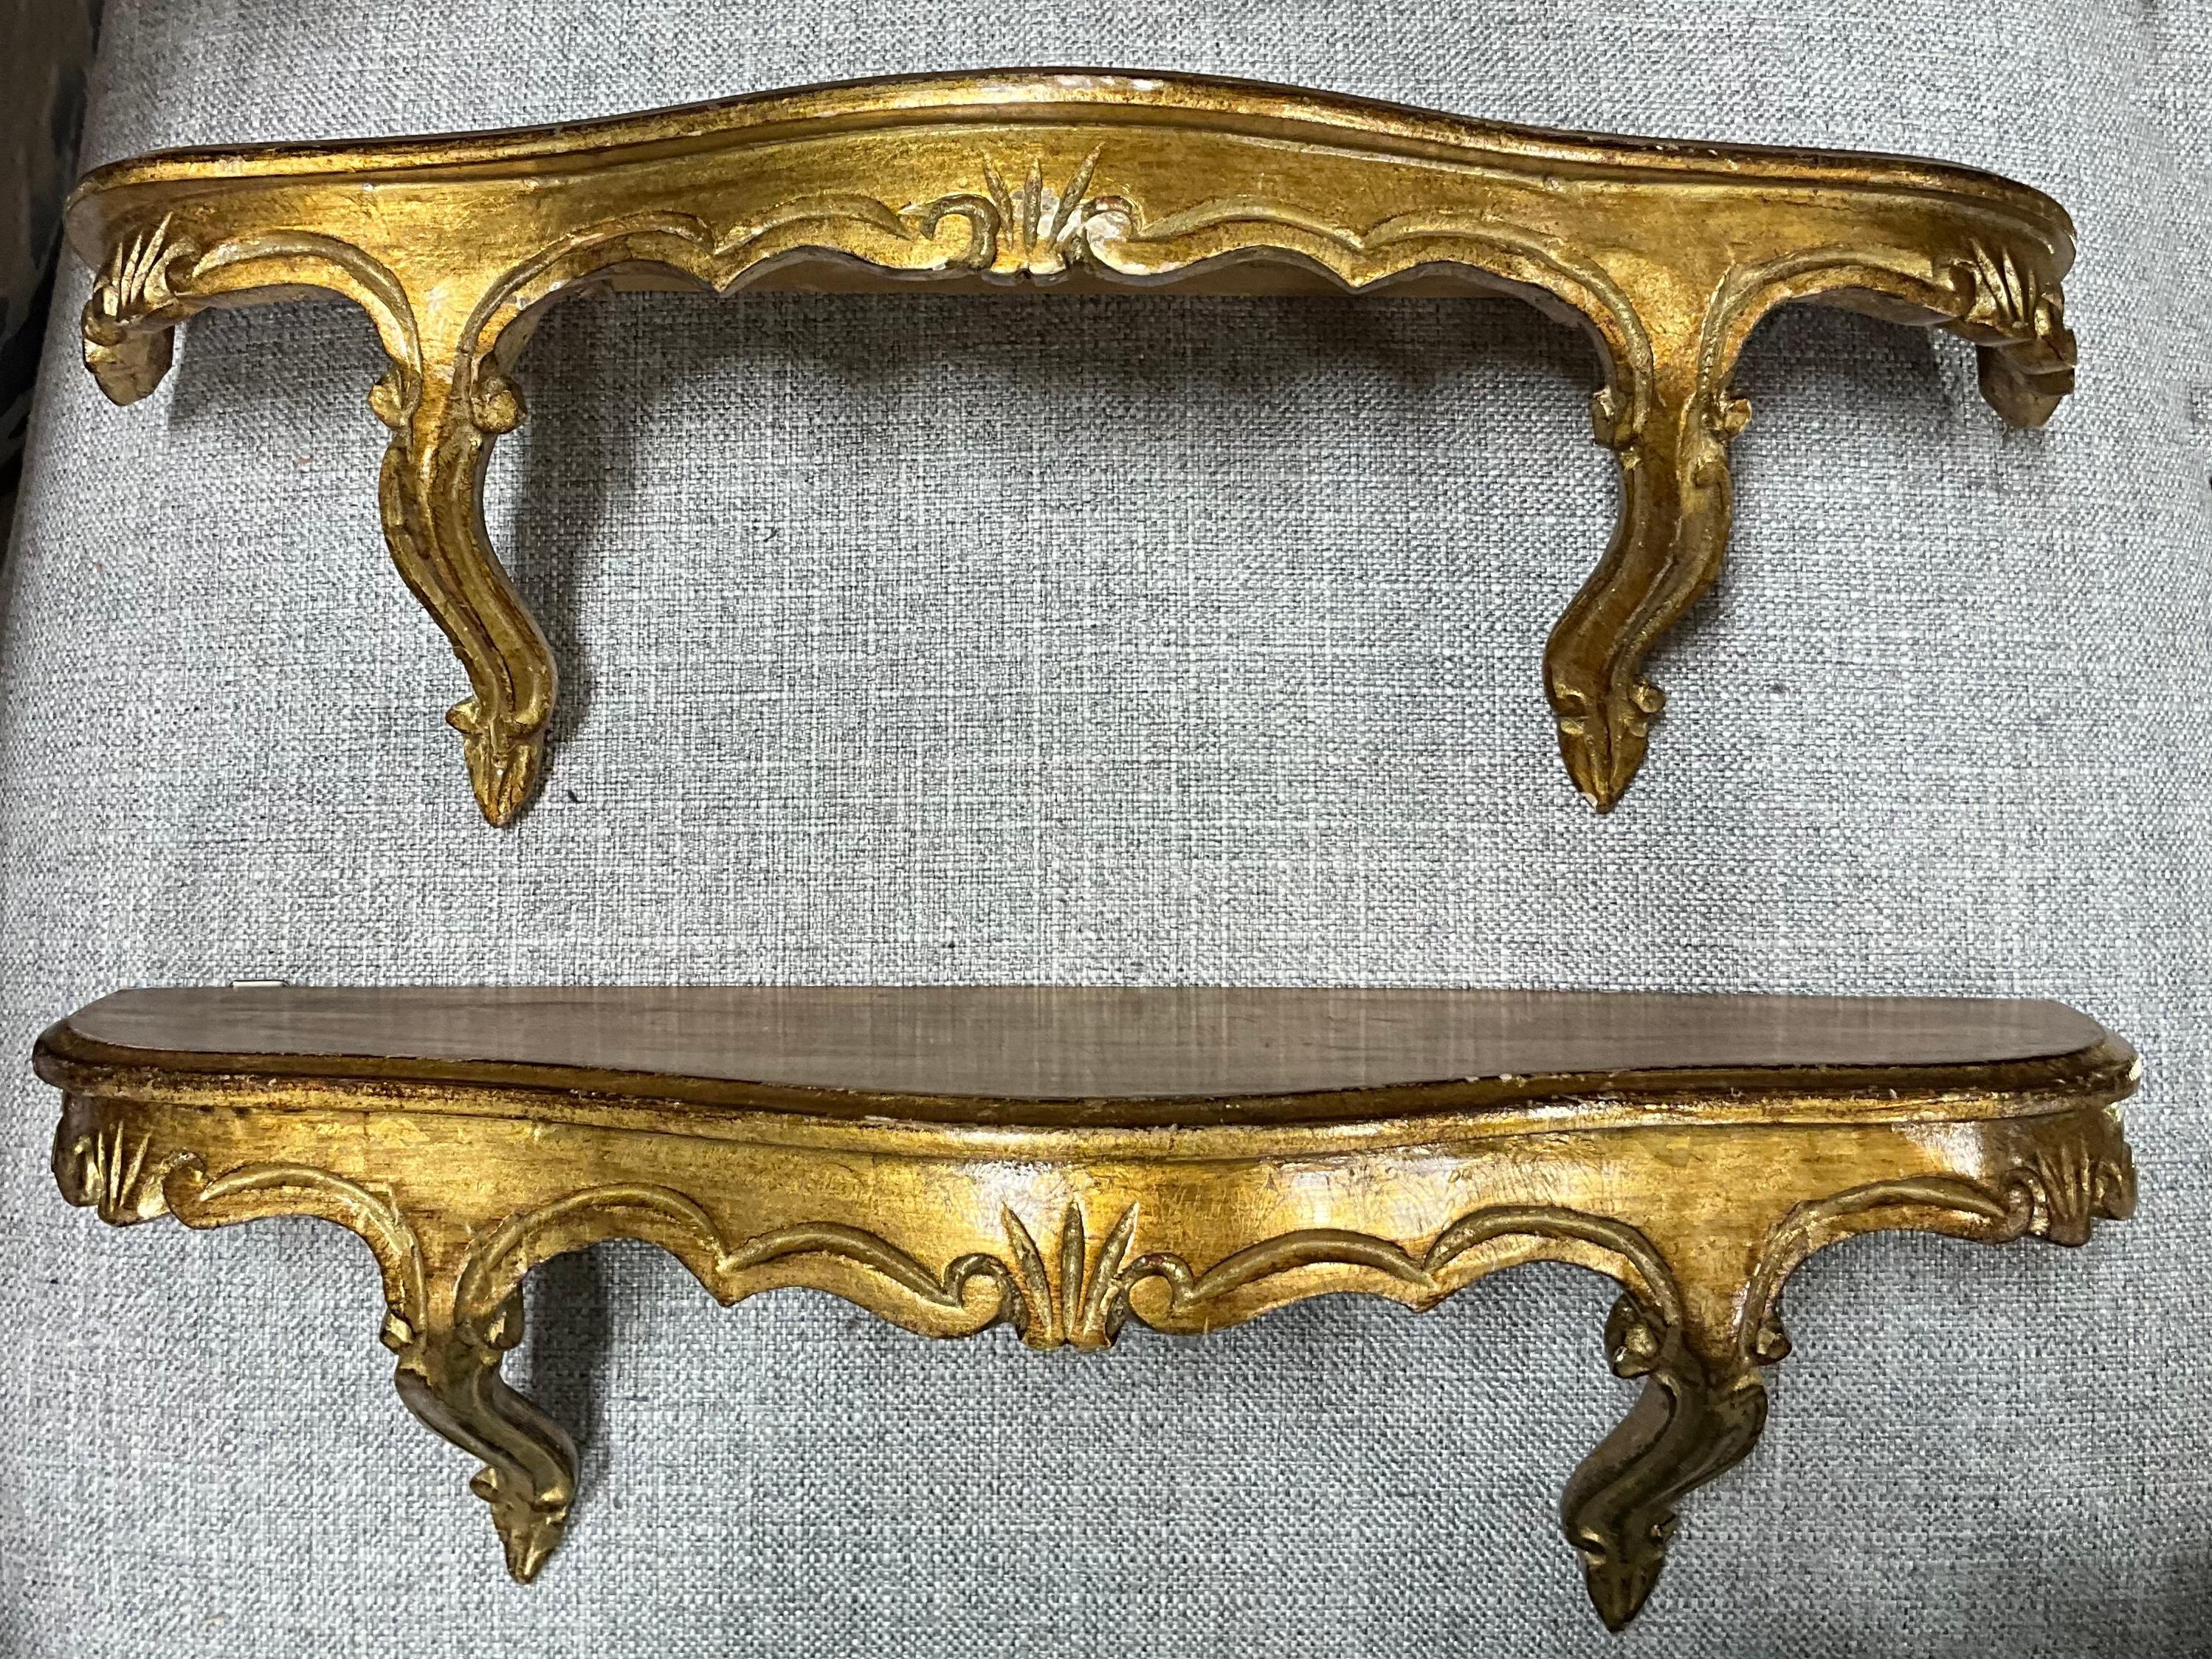 This is a diminutive pair of Italian carved giltwood Rococo style wall shelves or brackets by Decorative Crafts. They are poplar and an unusual size. The shelves are in very good vintage condition.